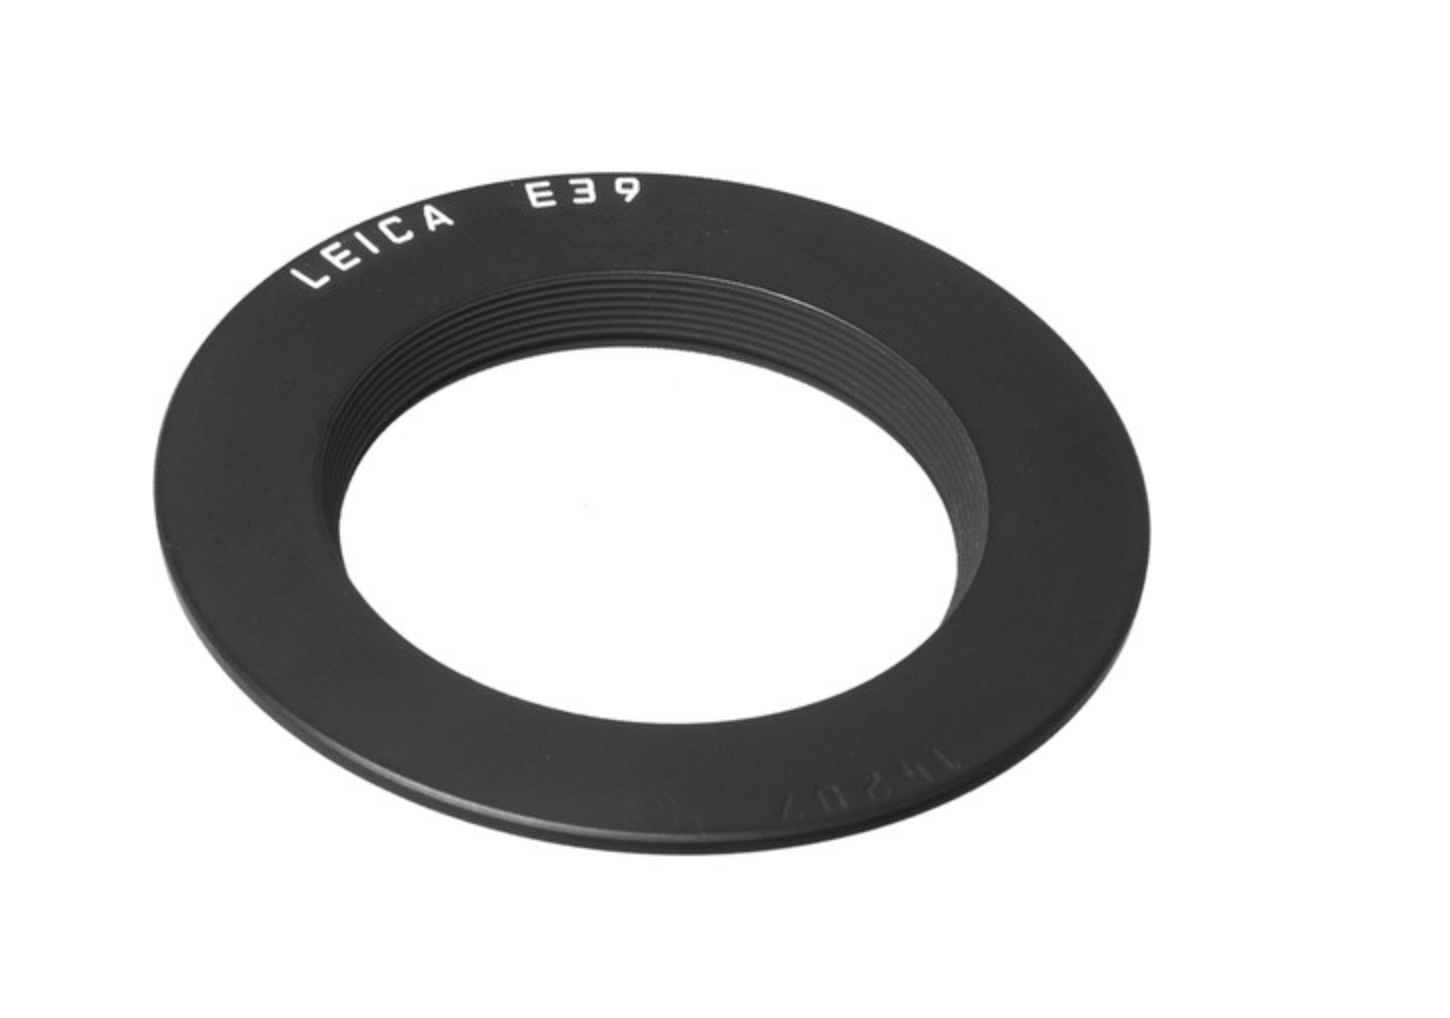 Leica E39 Adapter for Universal Polarizer M Filter